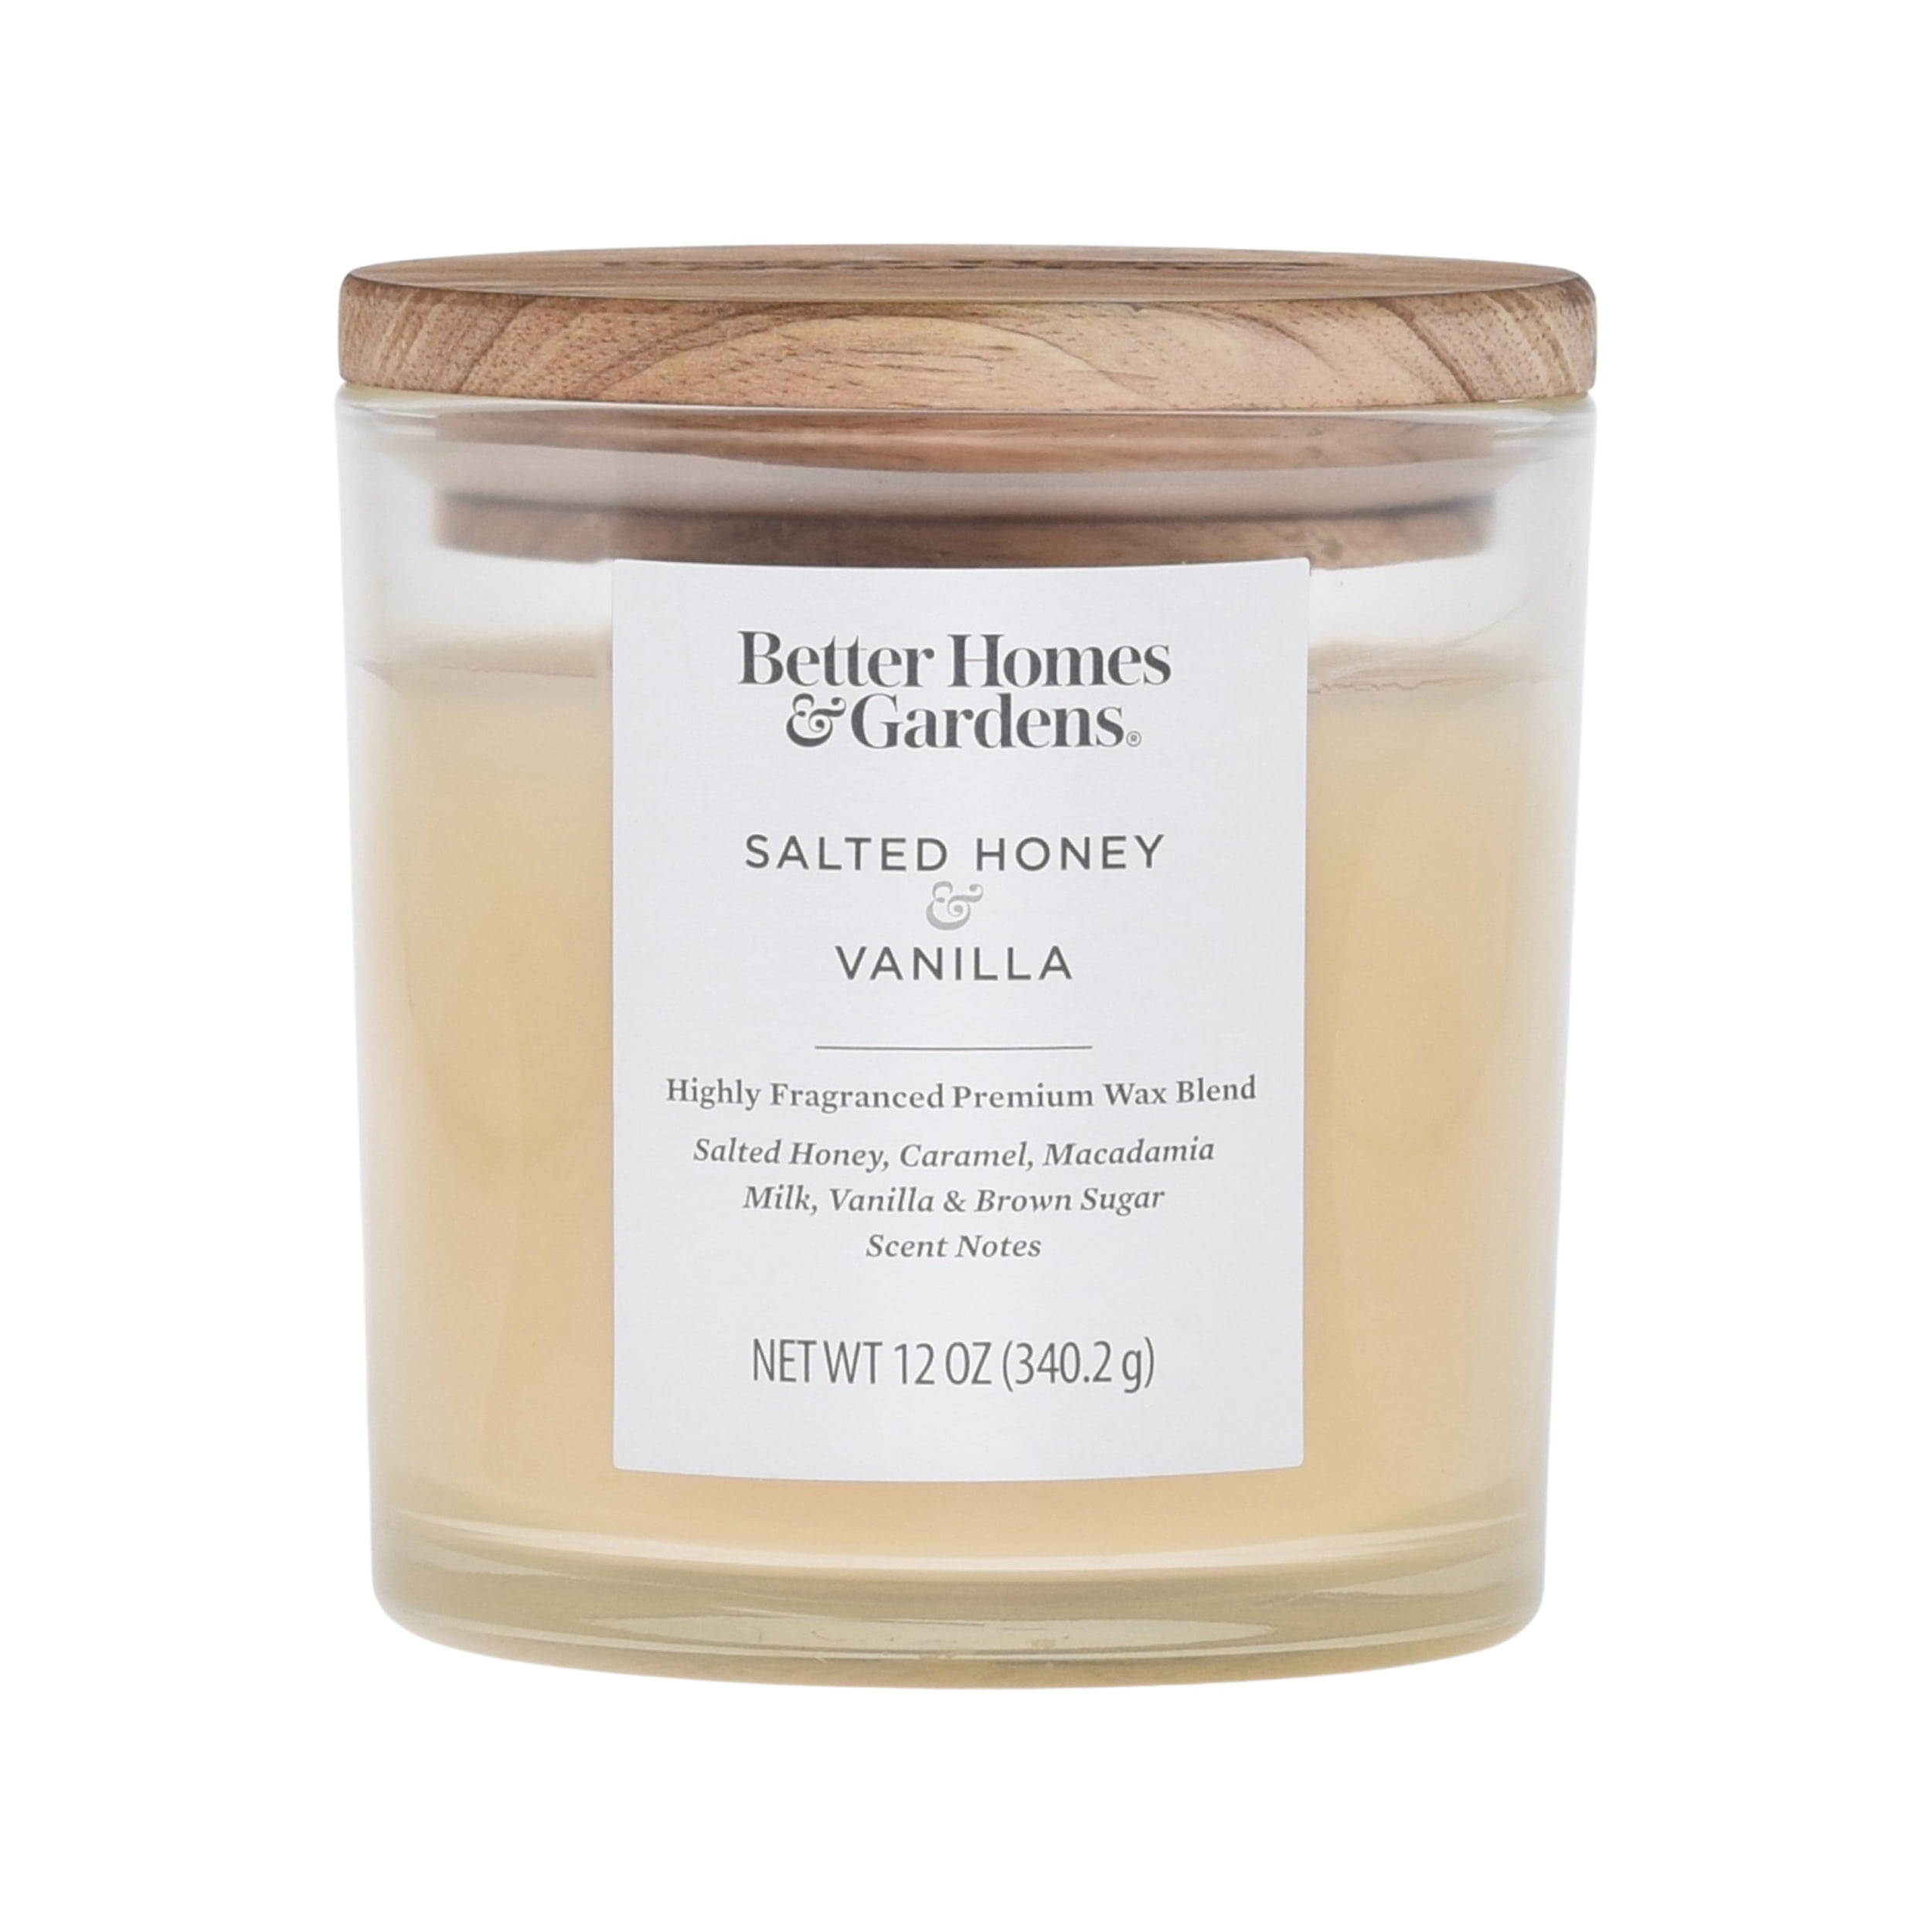  Whipped Honey + Vanilla Scent, Scented Candles For Home, STRONGLY SCENTED, Lasting Aromatherapy, Candle Gifts, Handcrafted USA